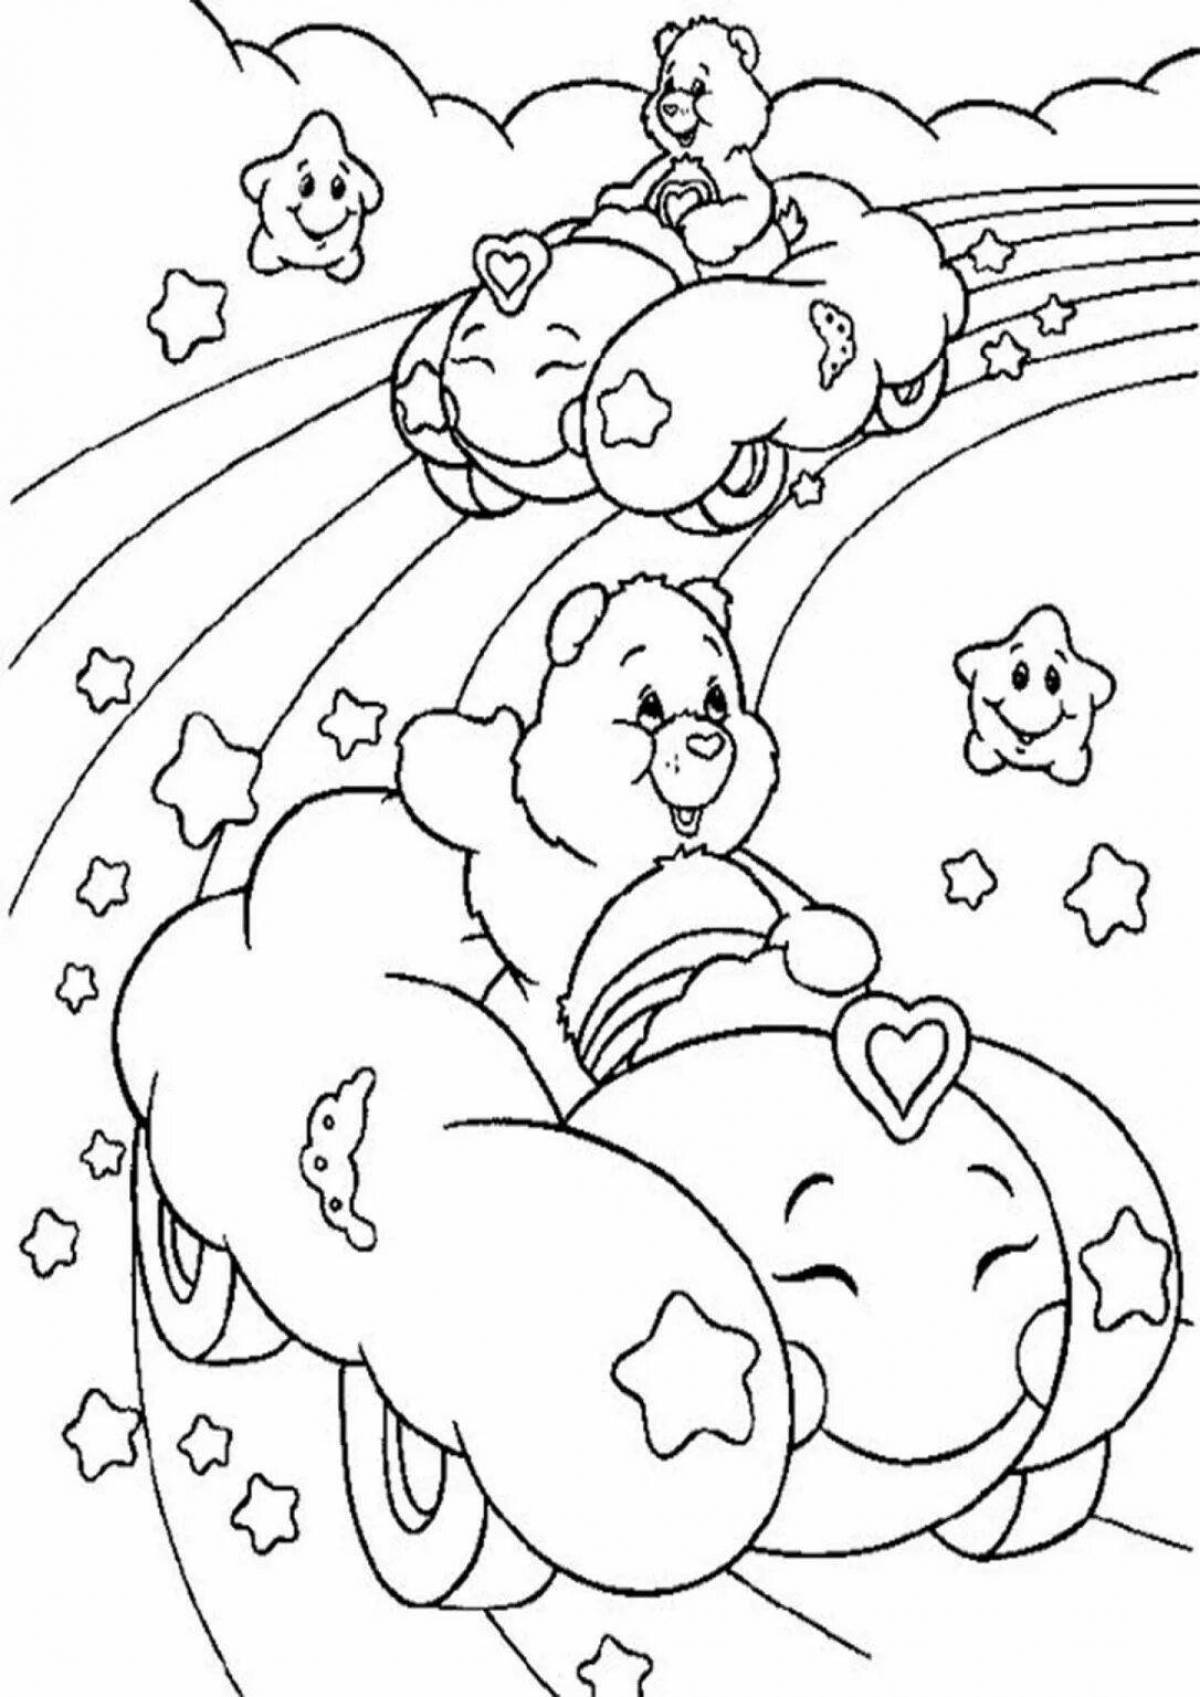 Coloring page blissful bear on the moon